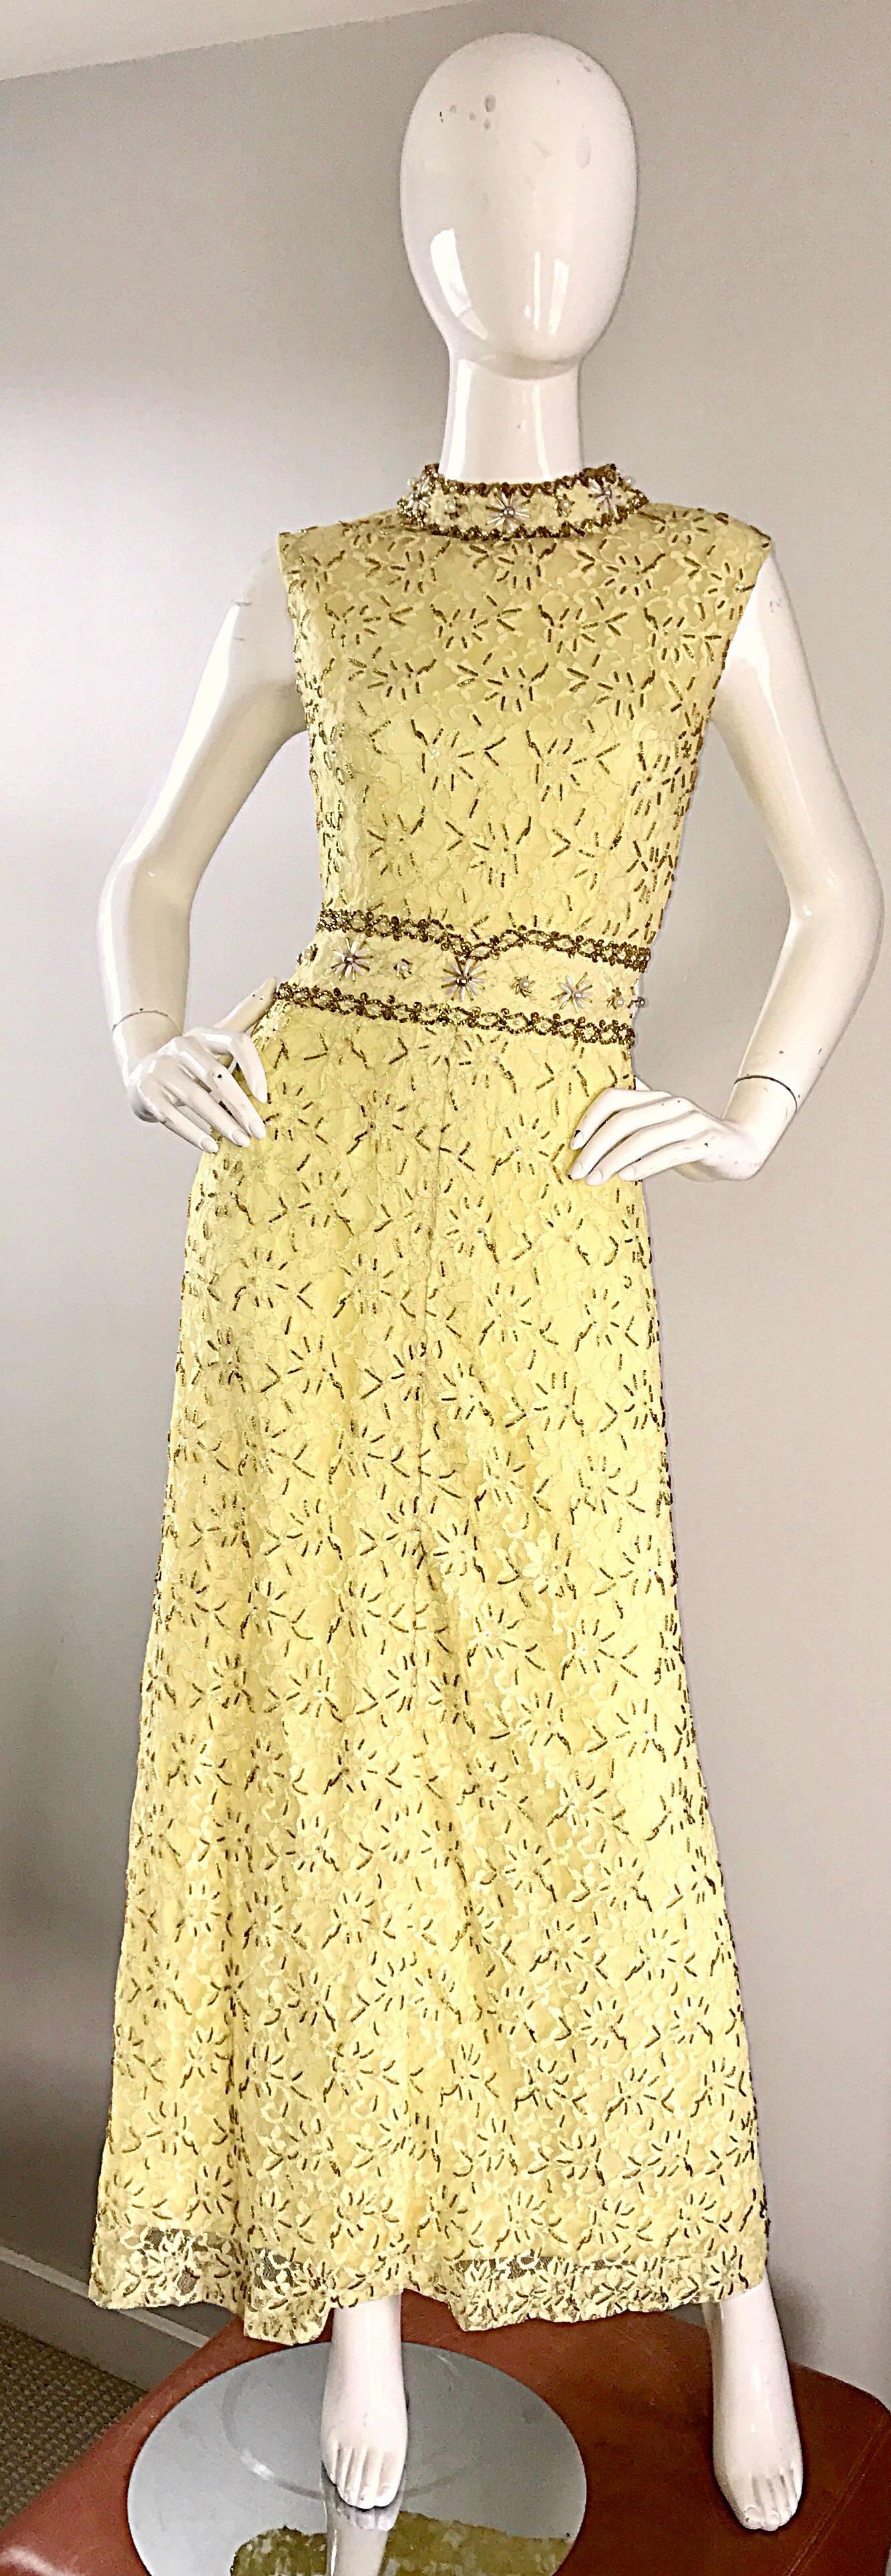 Elegant 60s yellow silk lace beaded, sequined, and pearl evening dress! Features a chic high neck, with a wonderful fitted bodice. Beaded waistband dips at center waist, and is super flattering. Thousands of hand-sewn sequins, beads and pearls